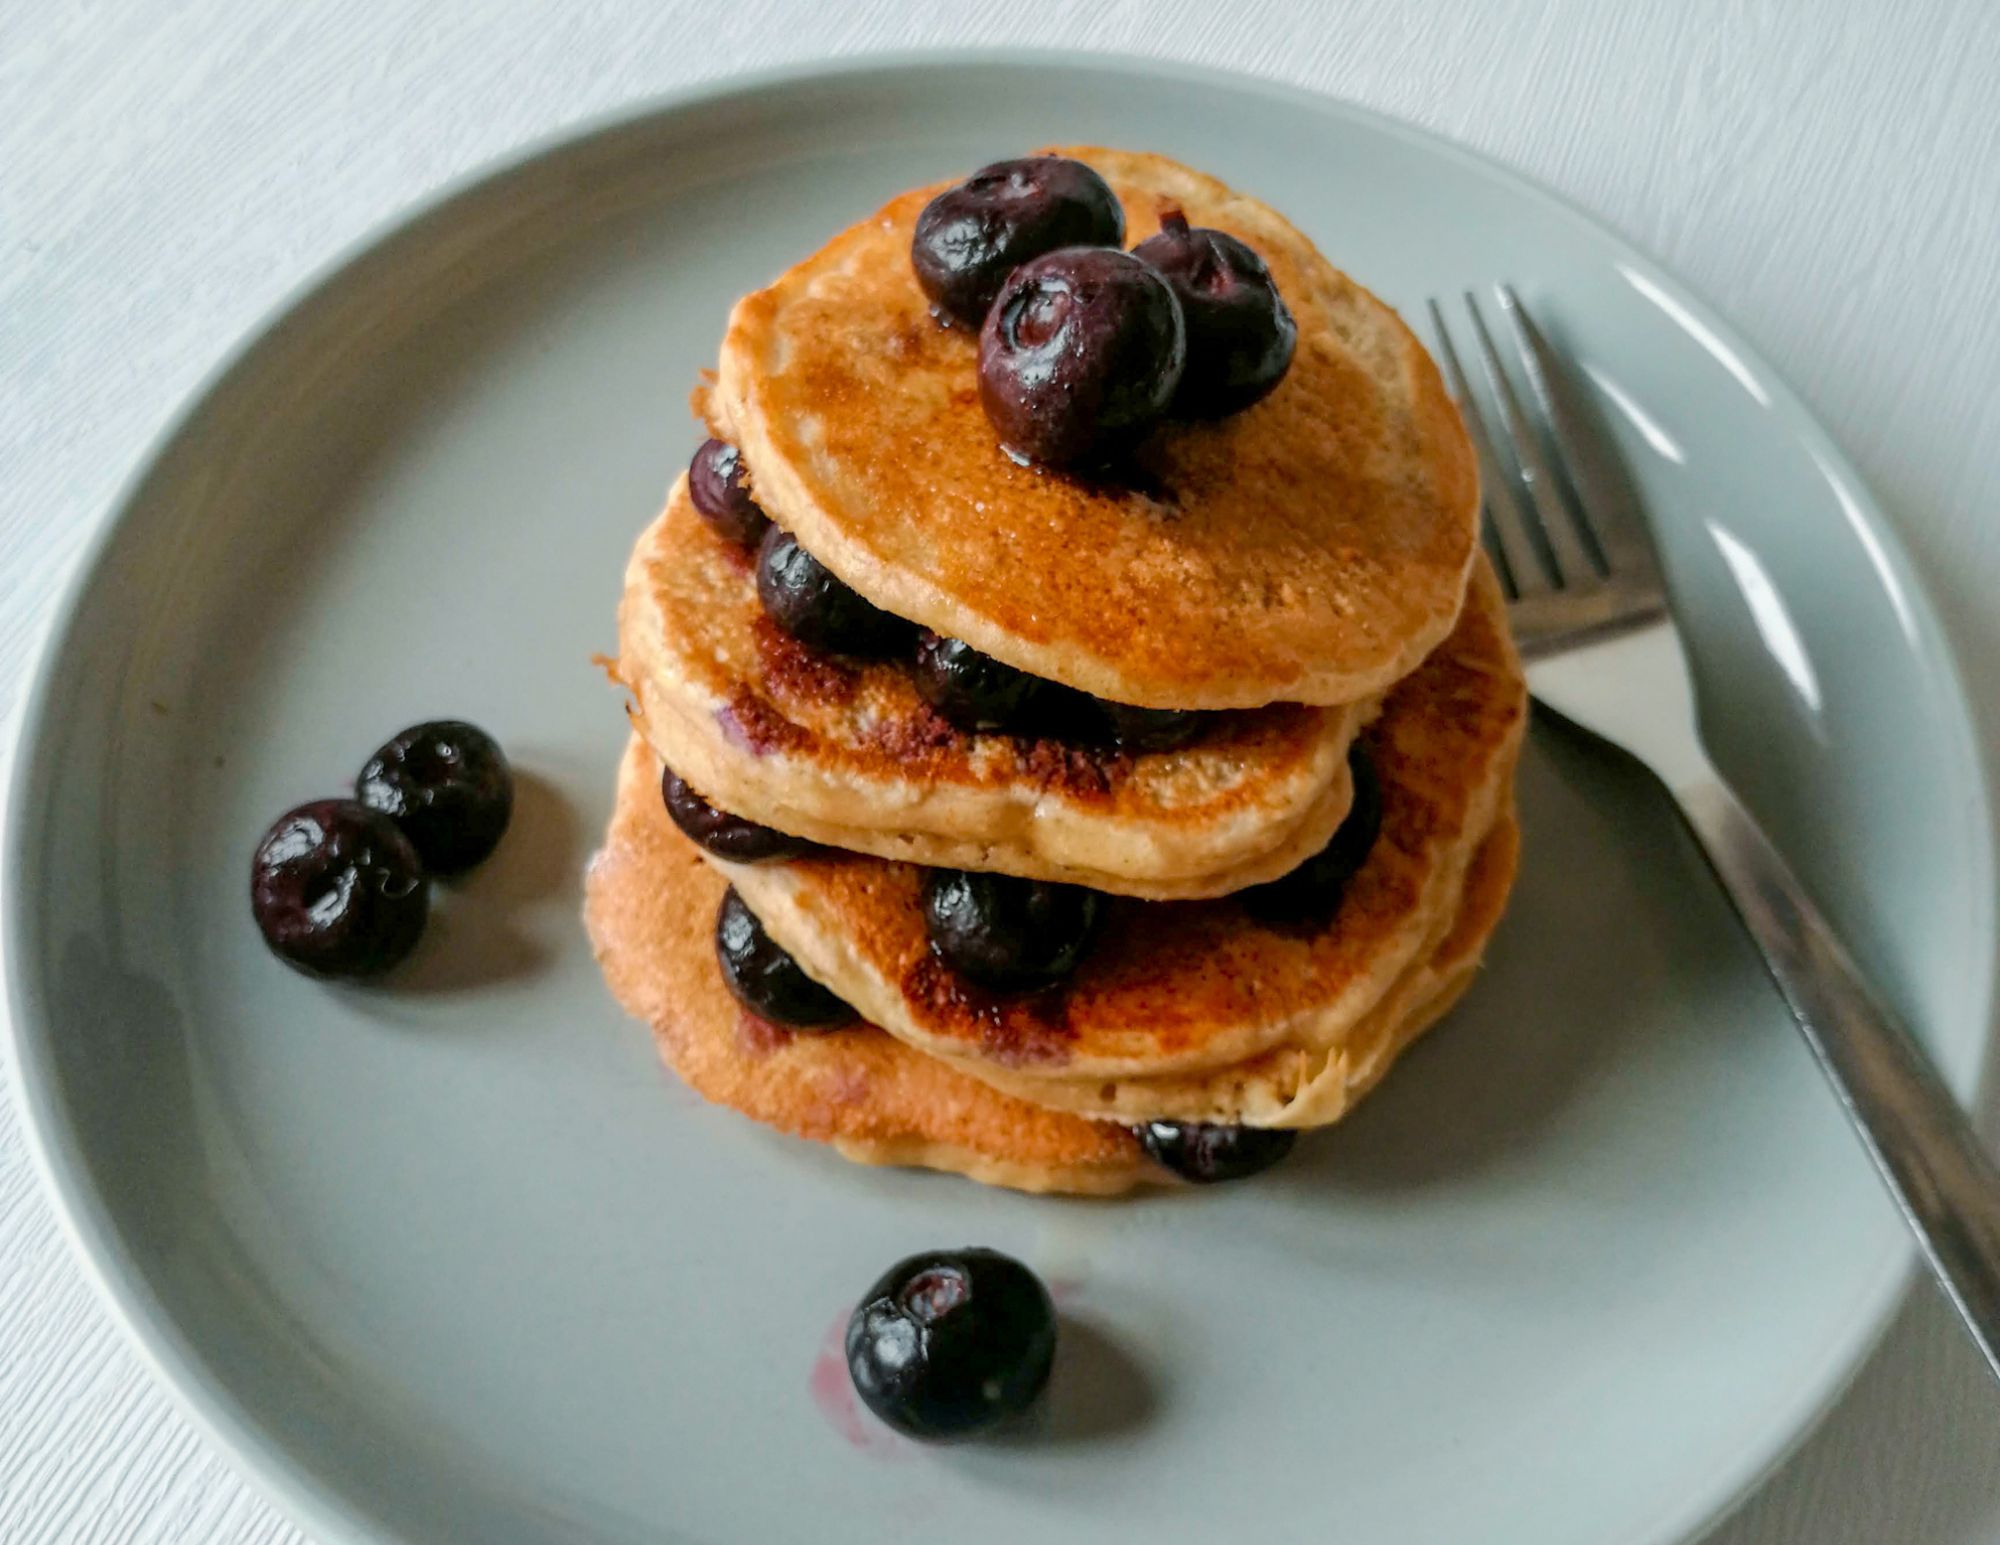 Apple & Peanut Butter Pancakes topped with blueberries